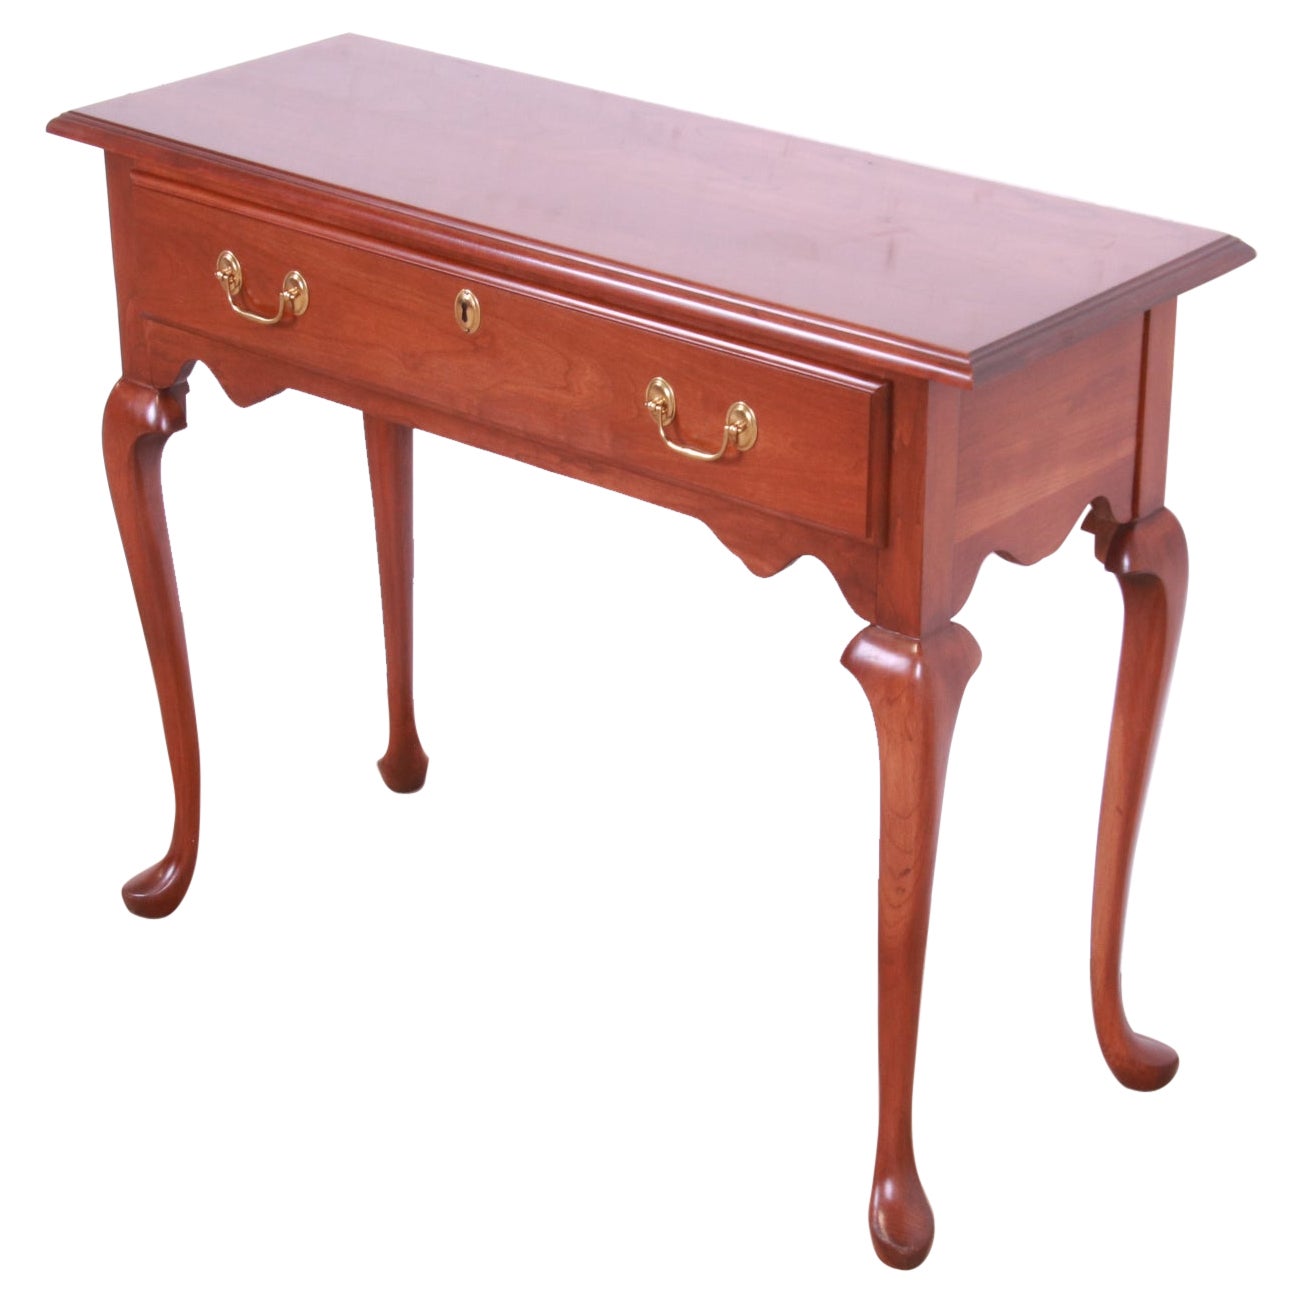 Harden Furniture Queen Anne Solid Cherry Wood Console or Sofa Table For Sale